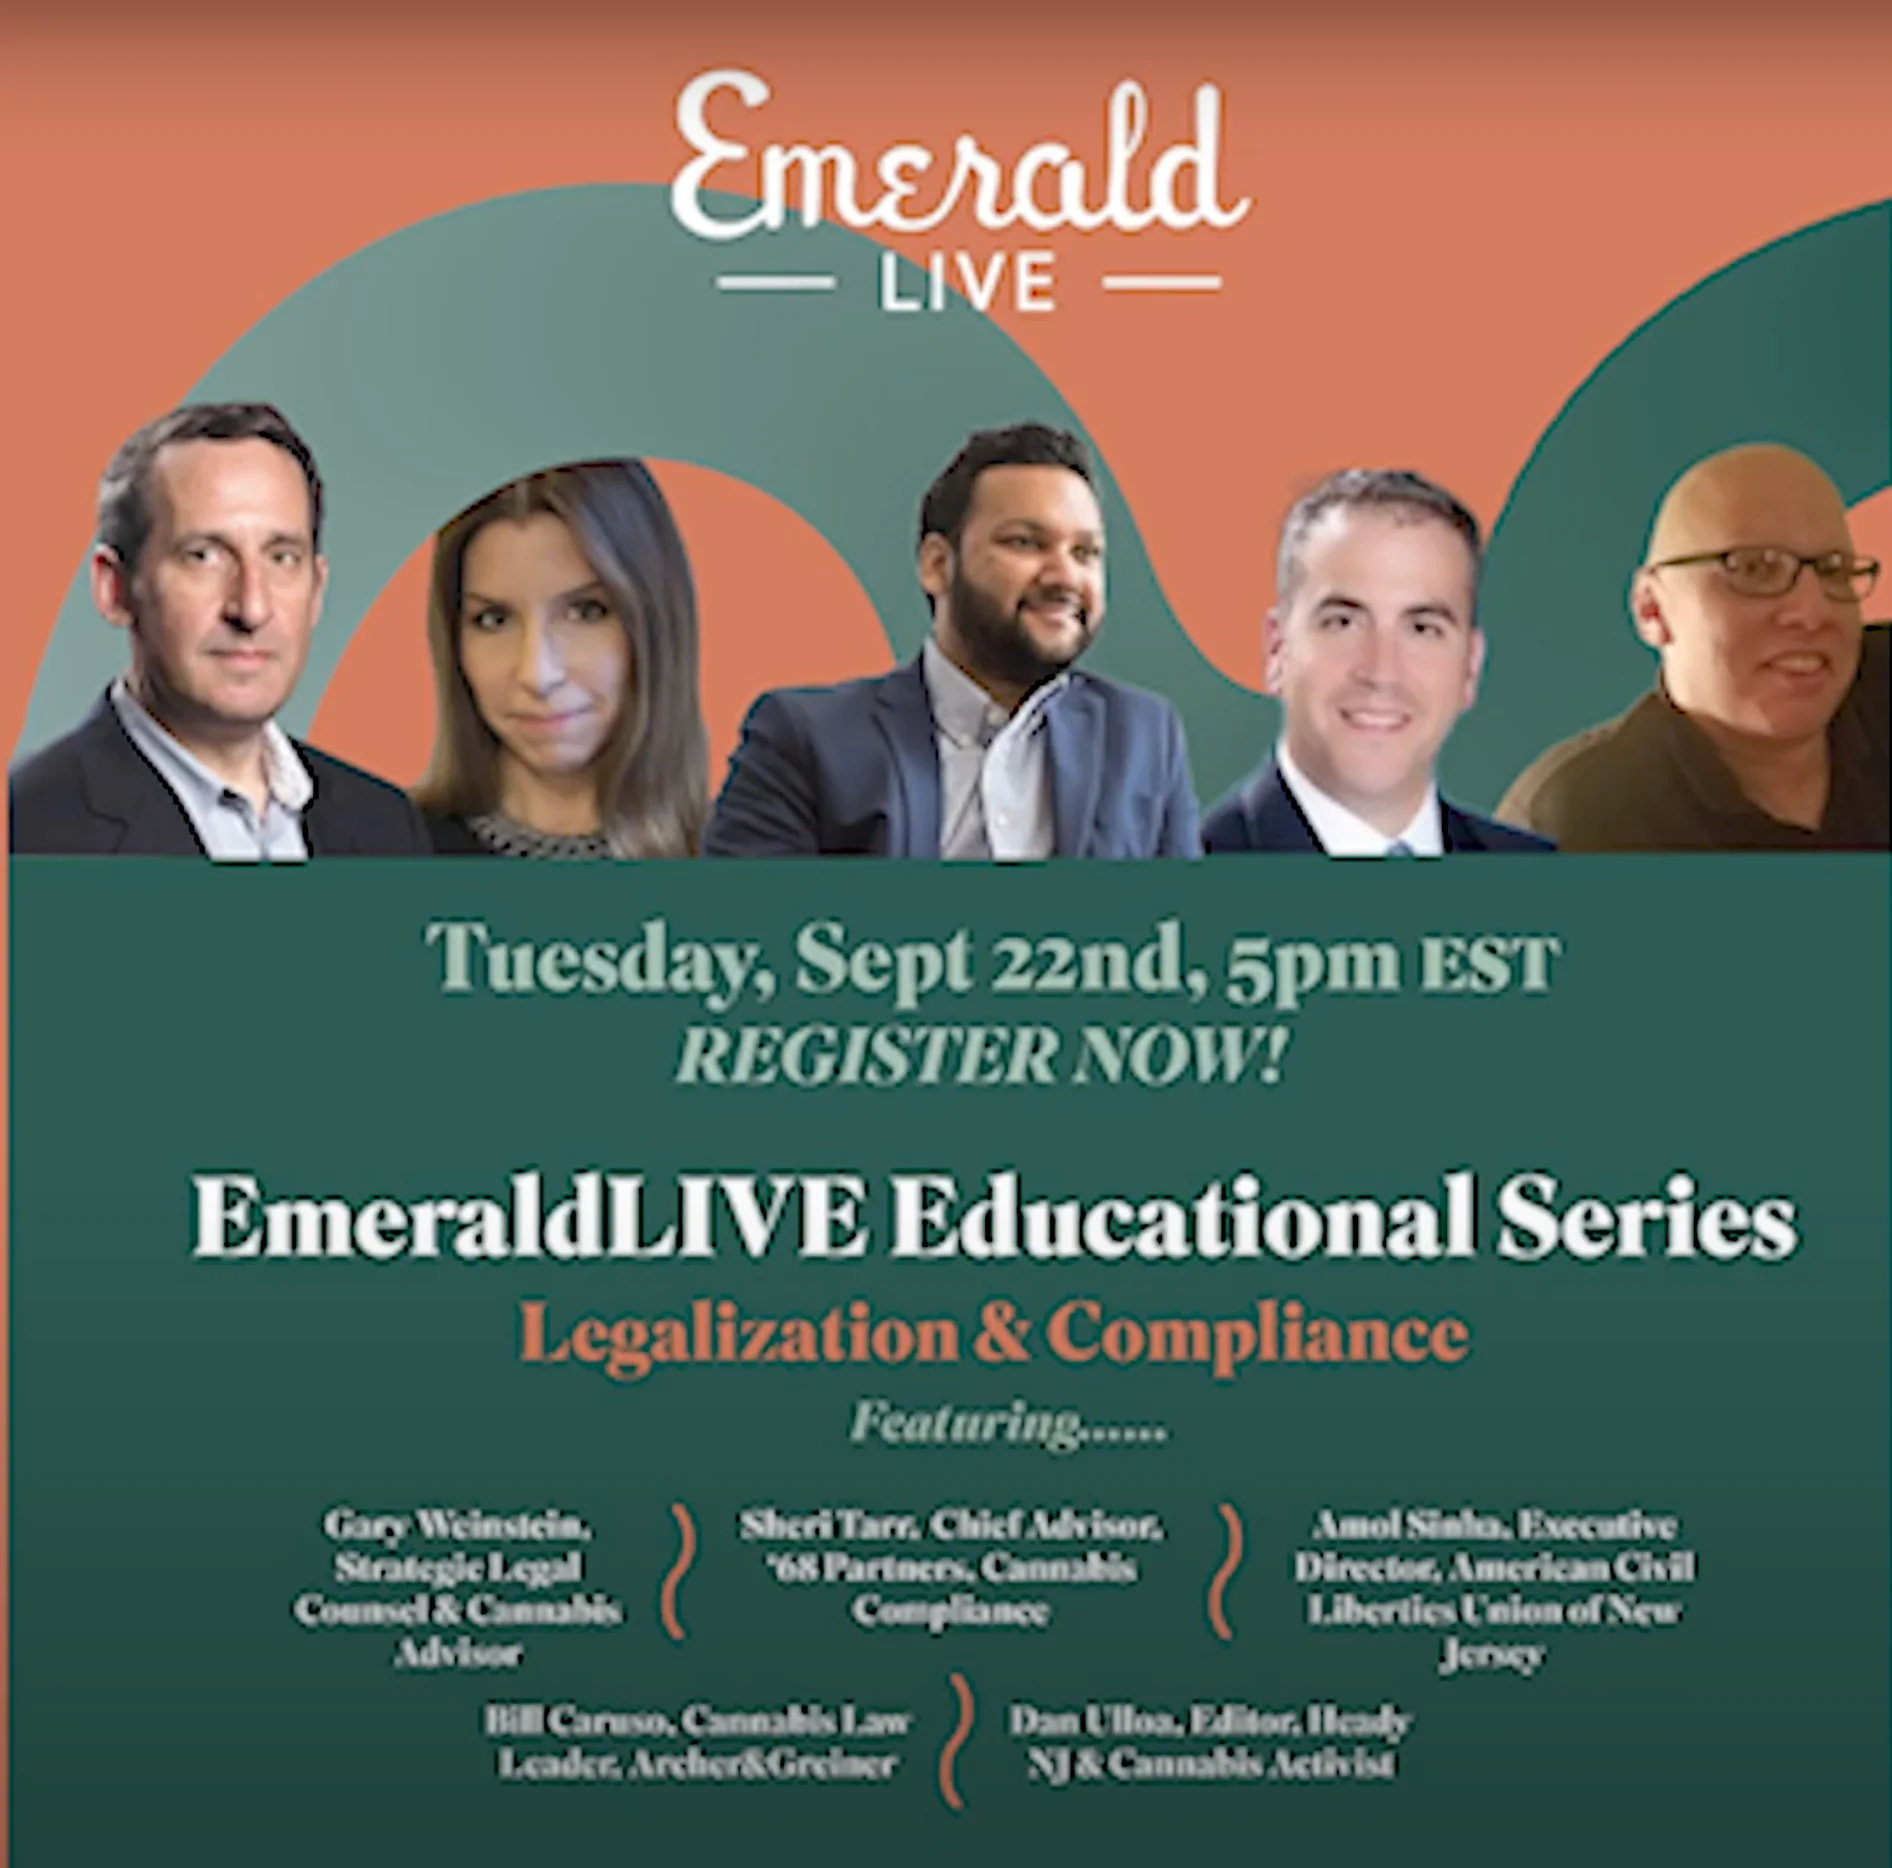 'EmeraldLIVE: Legalization & Compliance' flyer for the Tuesday, September 22, 2020 virtual conference taking place at 5p EST with Gary Weinstein, Sheri Tarr, and Amol.